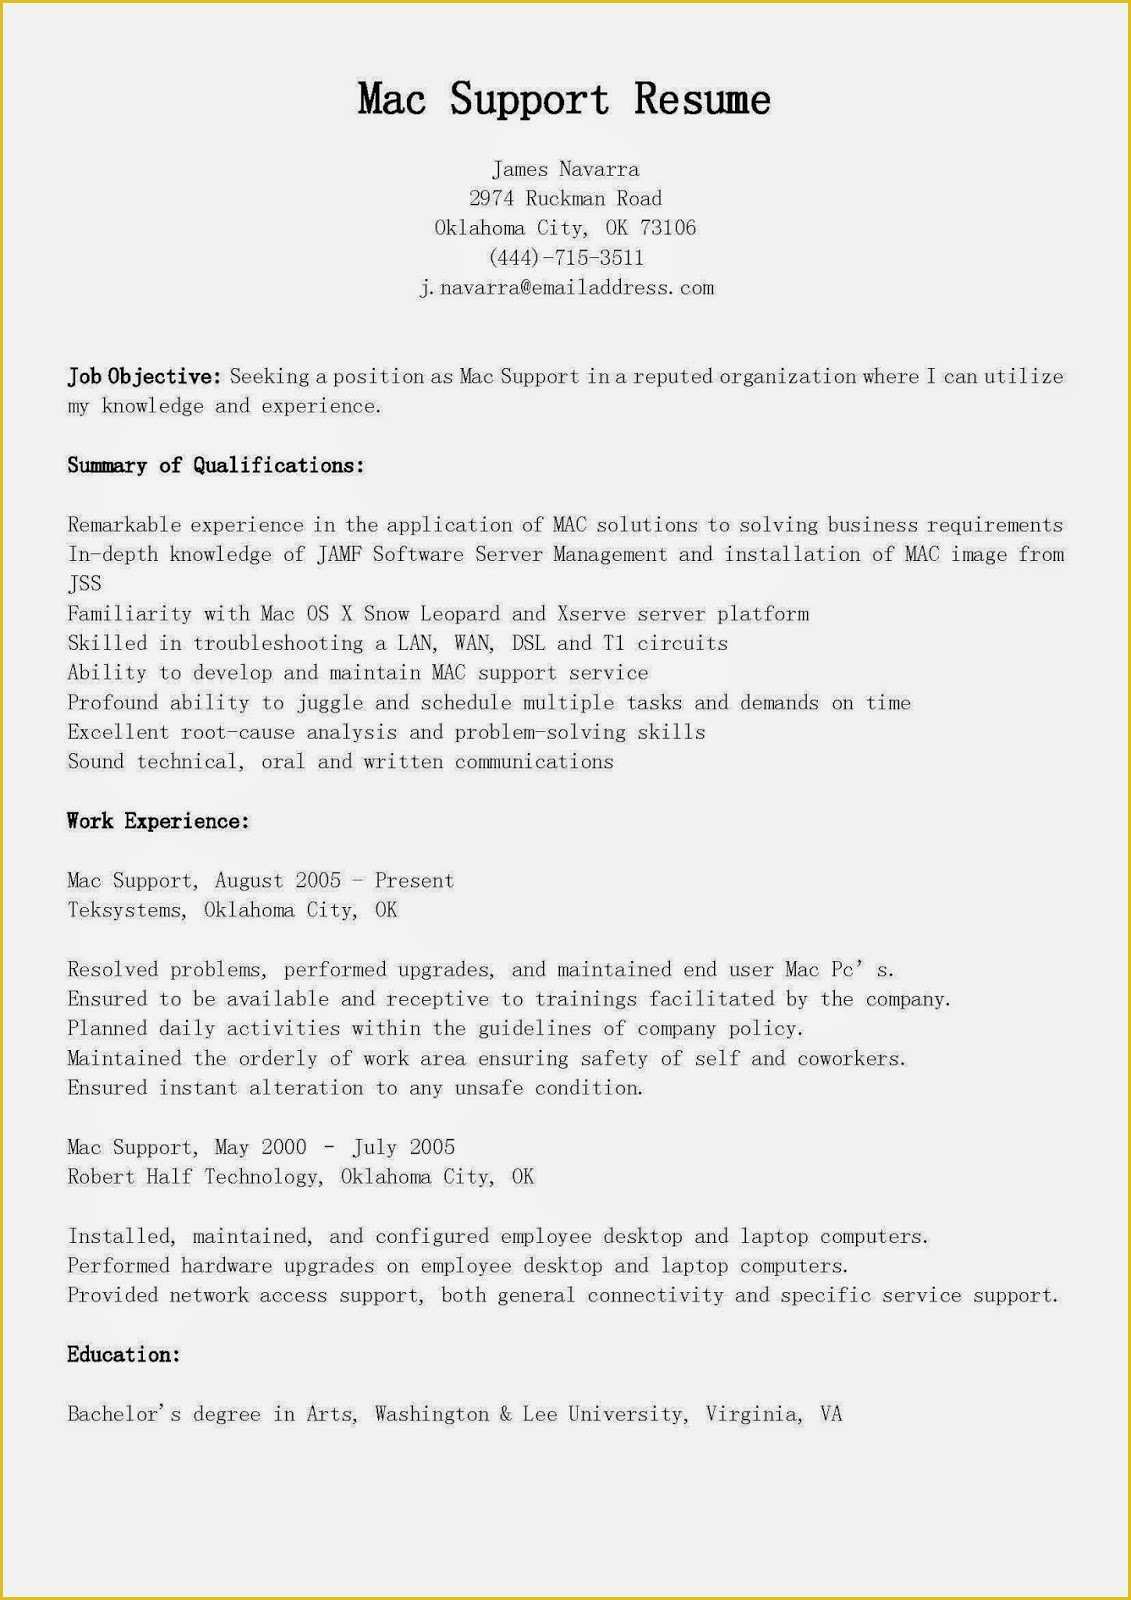 Free Resume Templates for Mac Of Resume Samples Mac Support Resume Sample